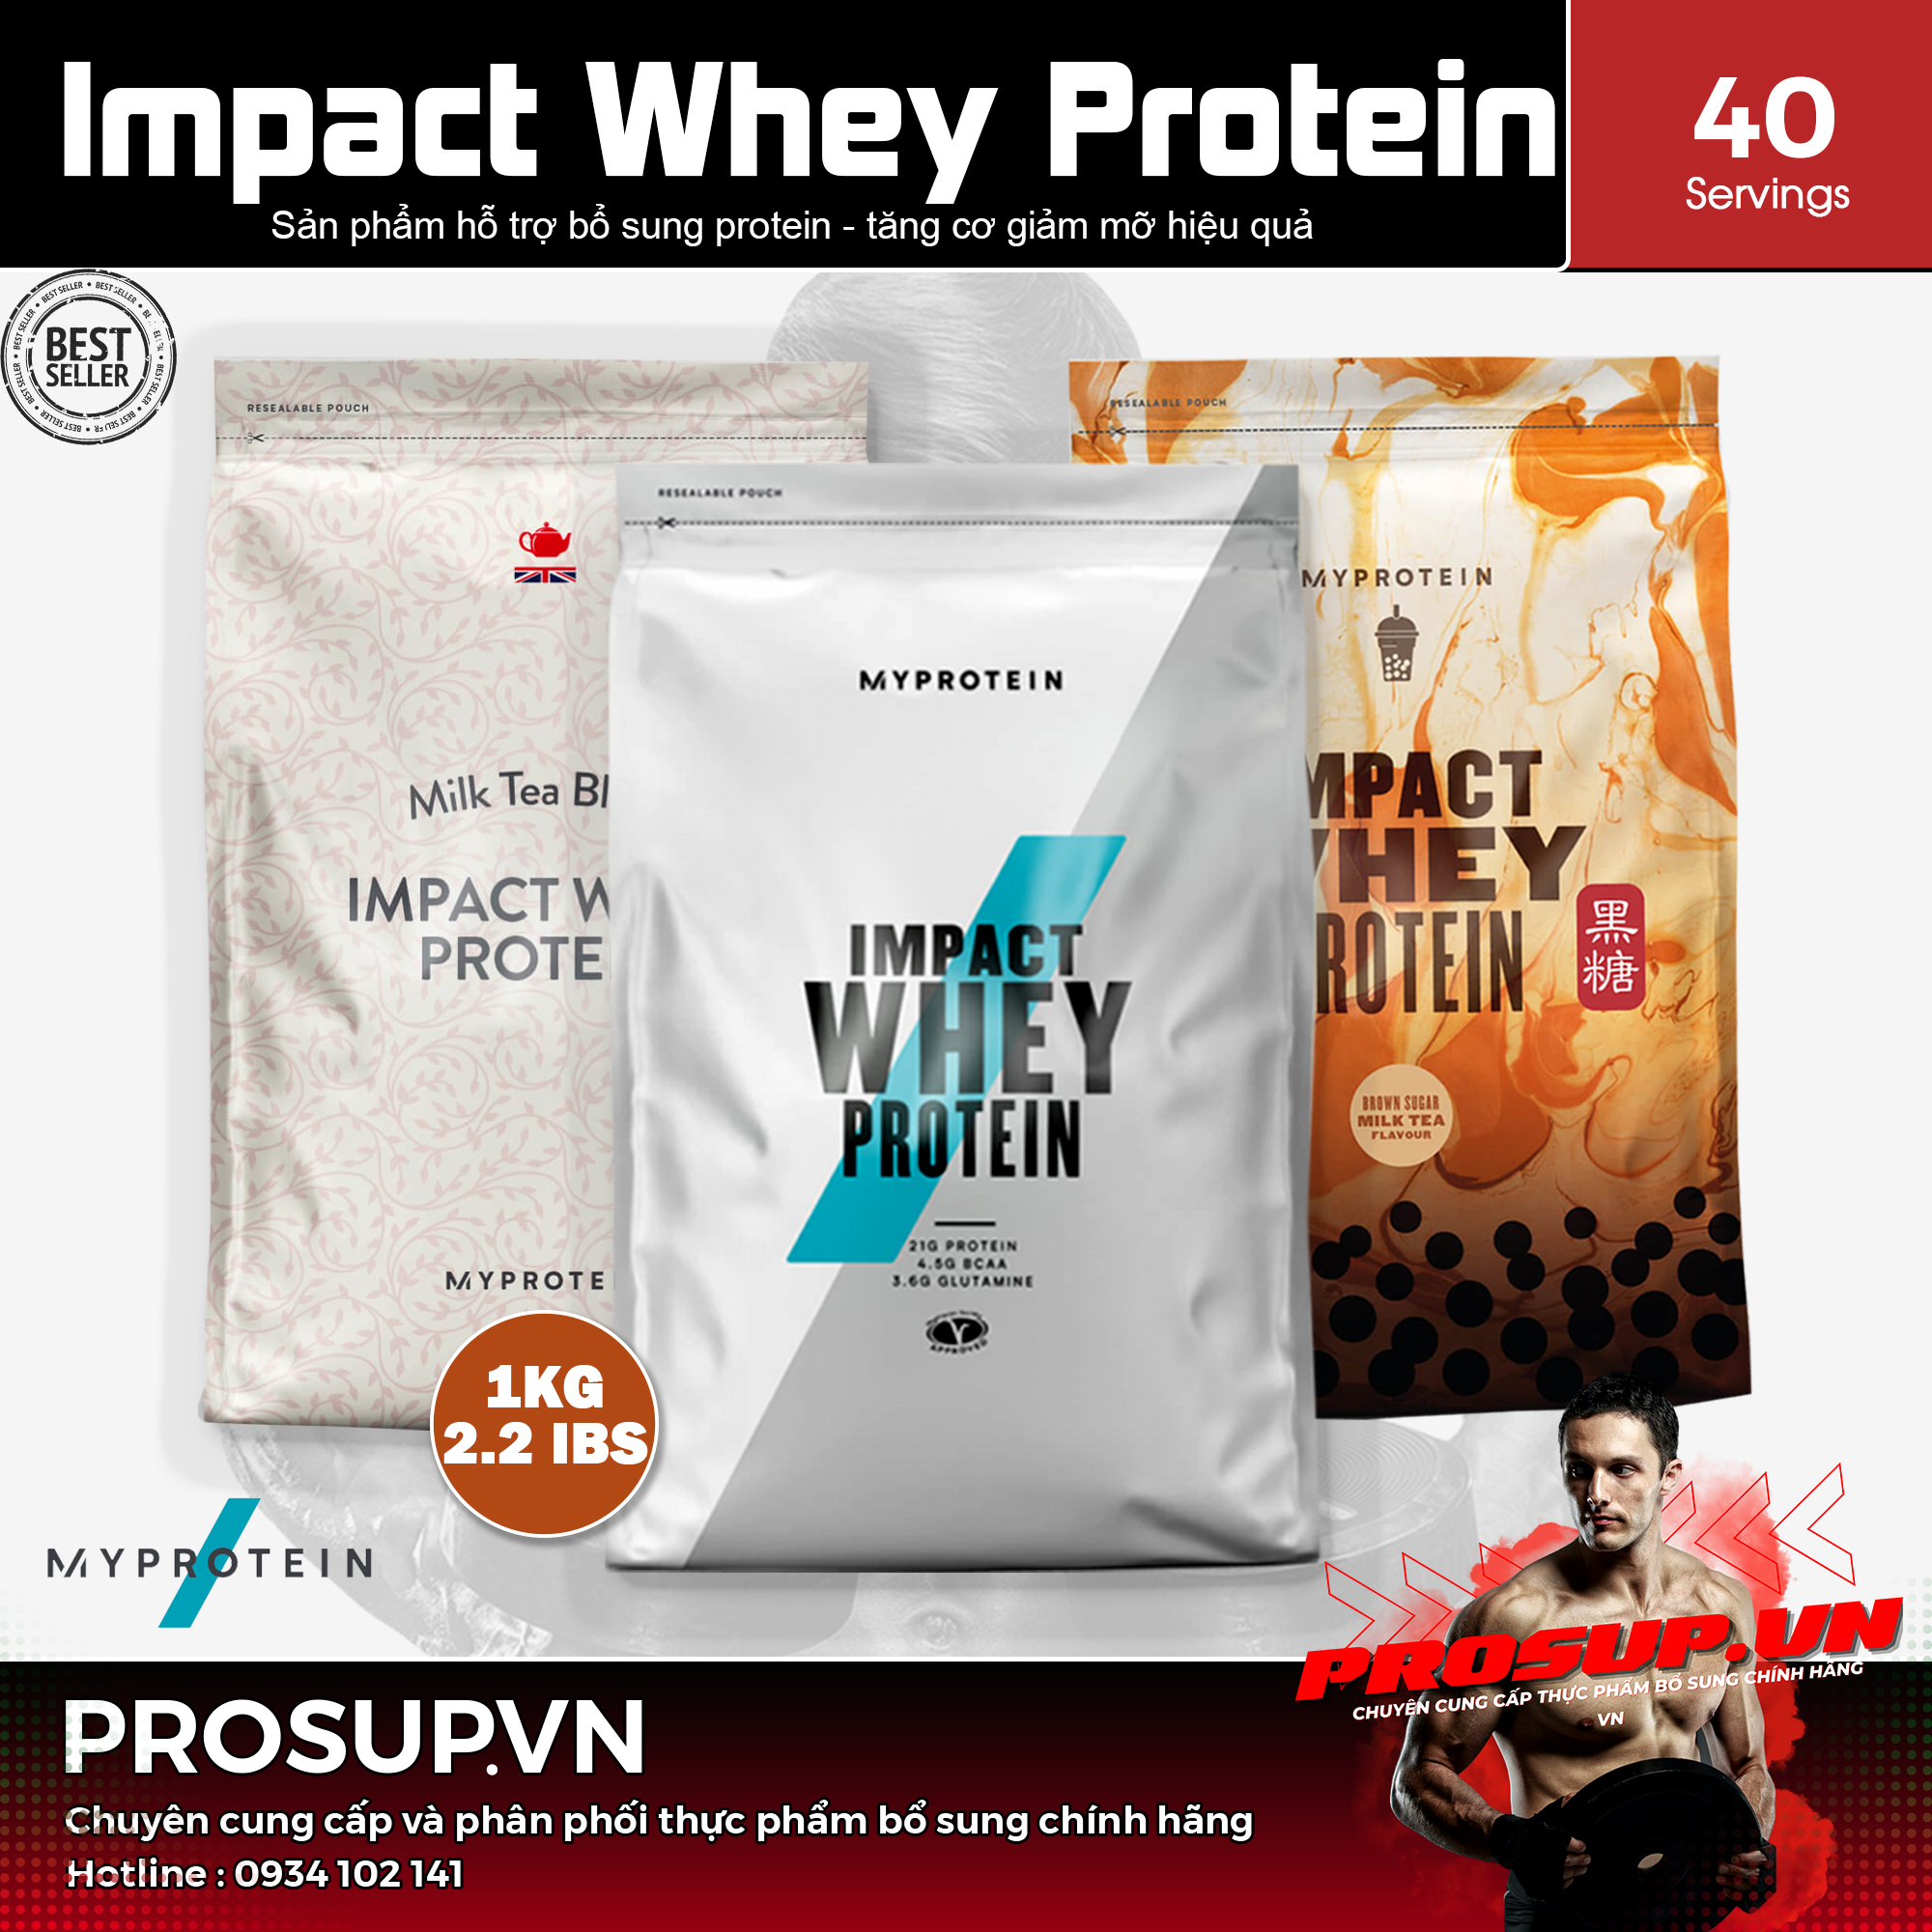 Whey Protein - My Protein - Impact Whey Protein 2.2LBS Bổ sung dĩnh dưỡng